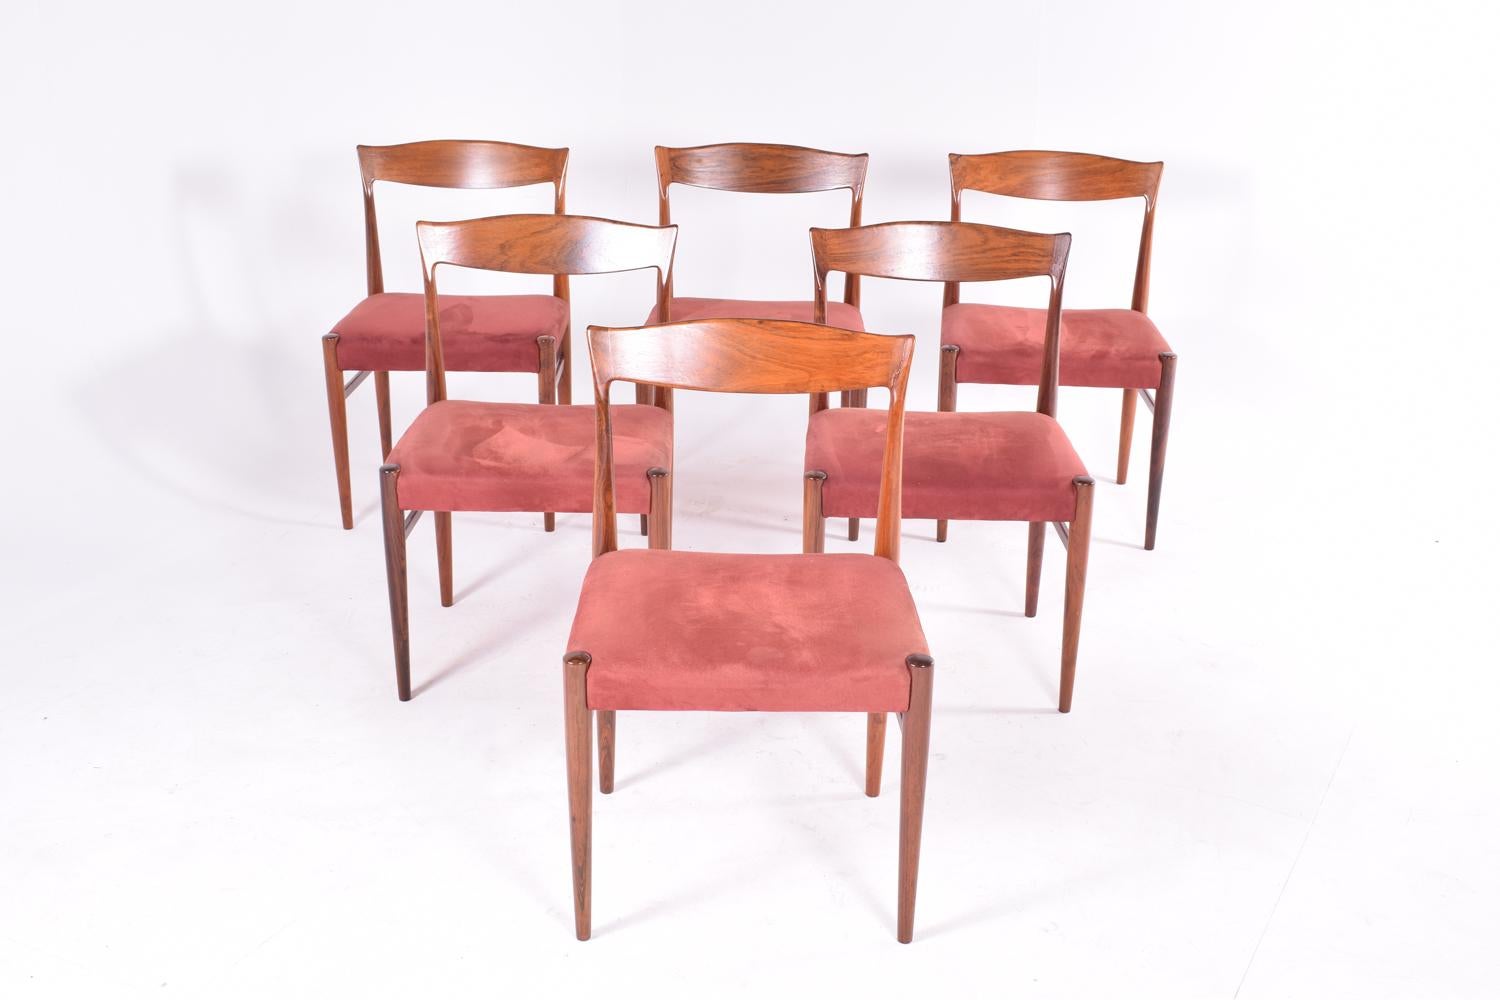 This set of Danish midcentury dining chairs is a good representative of the amazing Scandinavian design, such a fluid structure with a beautiful construction and great comfortability, combining an amazing rosewood veneer and woodwork with a